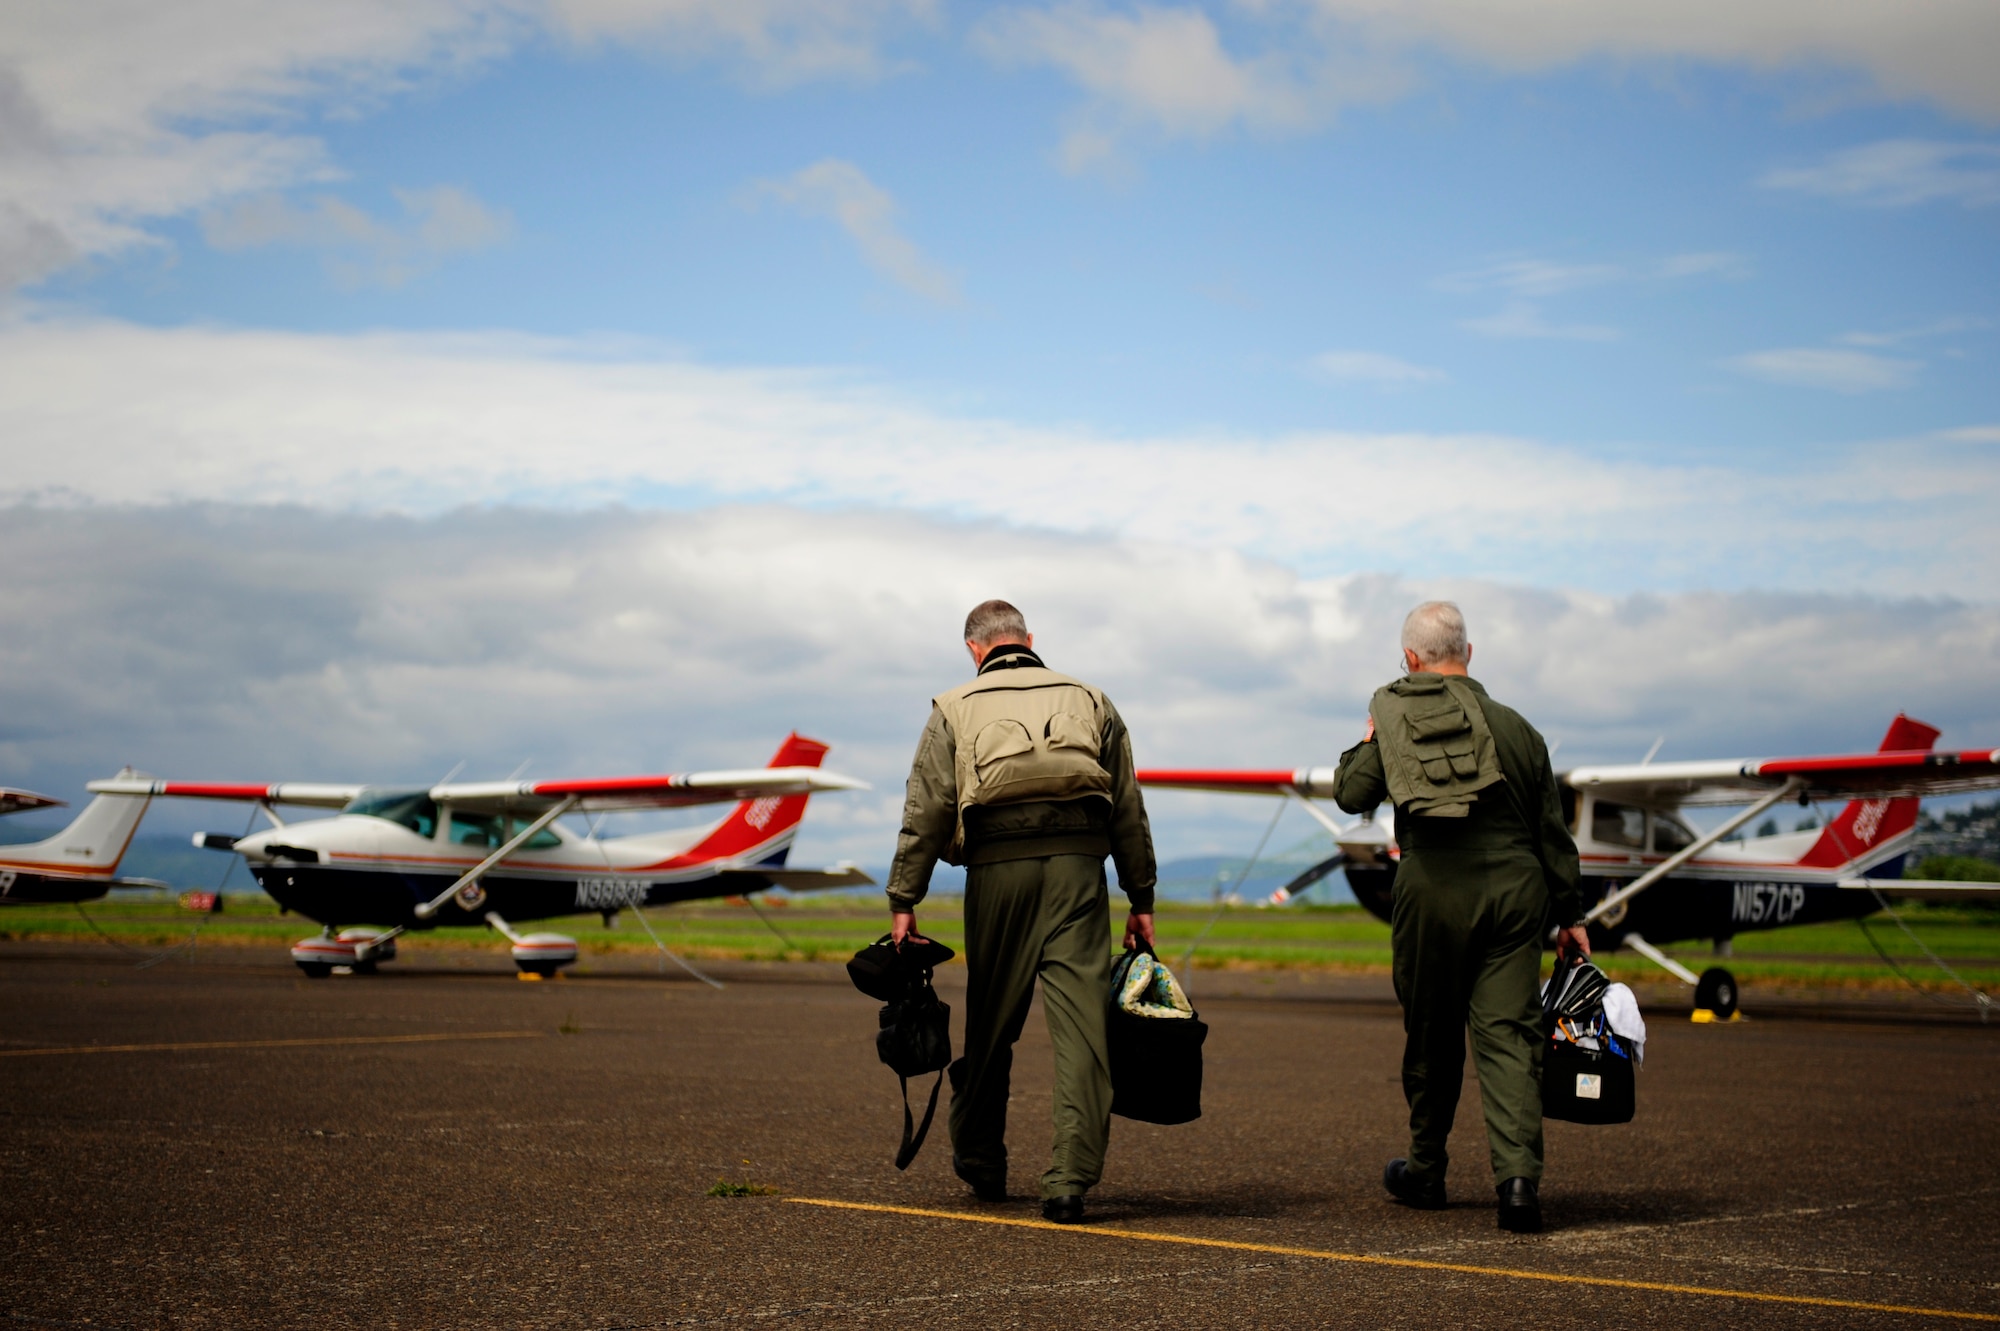 Lt. Col. Wayne Schulz (left) and Capt. John Barringer, U.S. Air Force Auxiliary, Civil Air Patrol, step to a C-182 Cessna before departing Astoria, Ore., during Amalgam Dart 2009, June 18. Amalgam Dart is a field test of the Department of Defense's ability to rapidly deploy a total air integrated defense system in the U.S. in order to deter, detect and defeat airborne threats. (U.S. Air Force photo by Staff Sgt. Jacob N. Bailey)